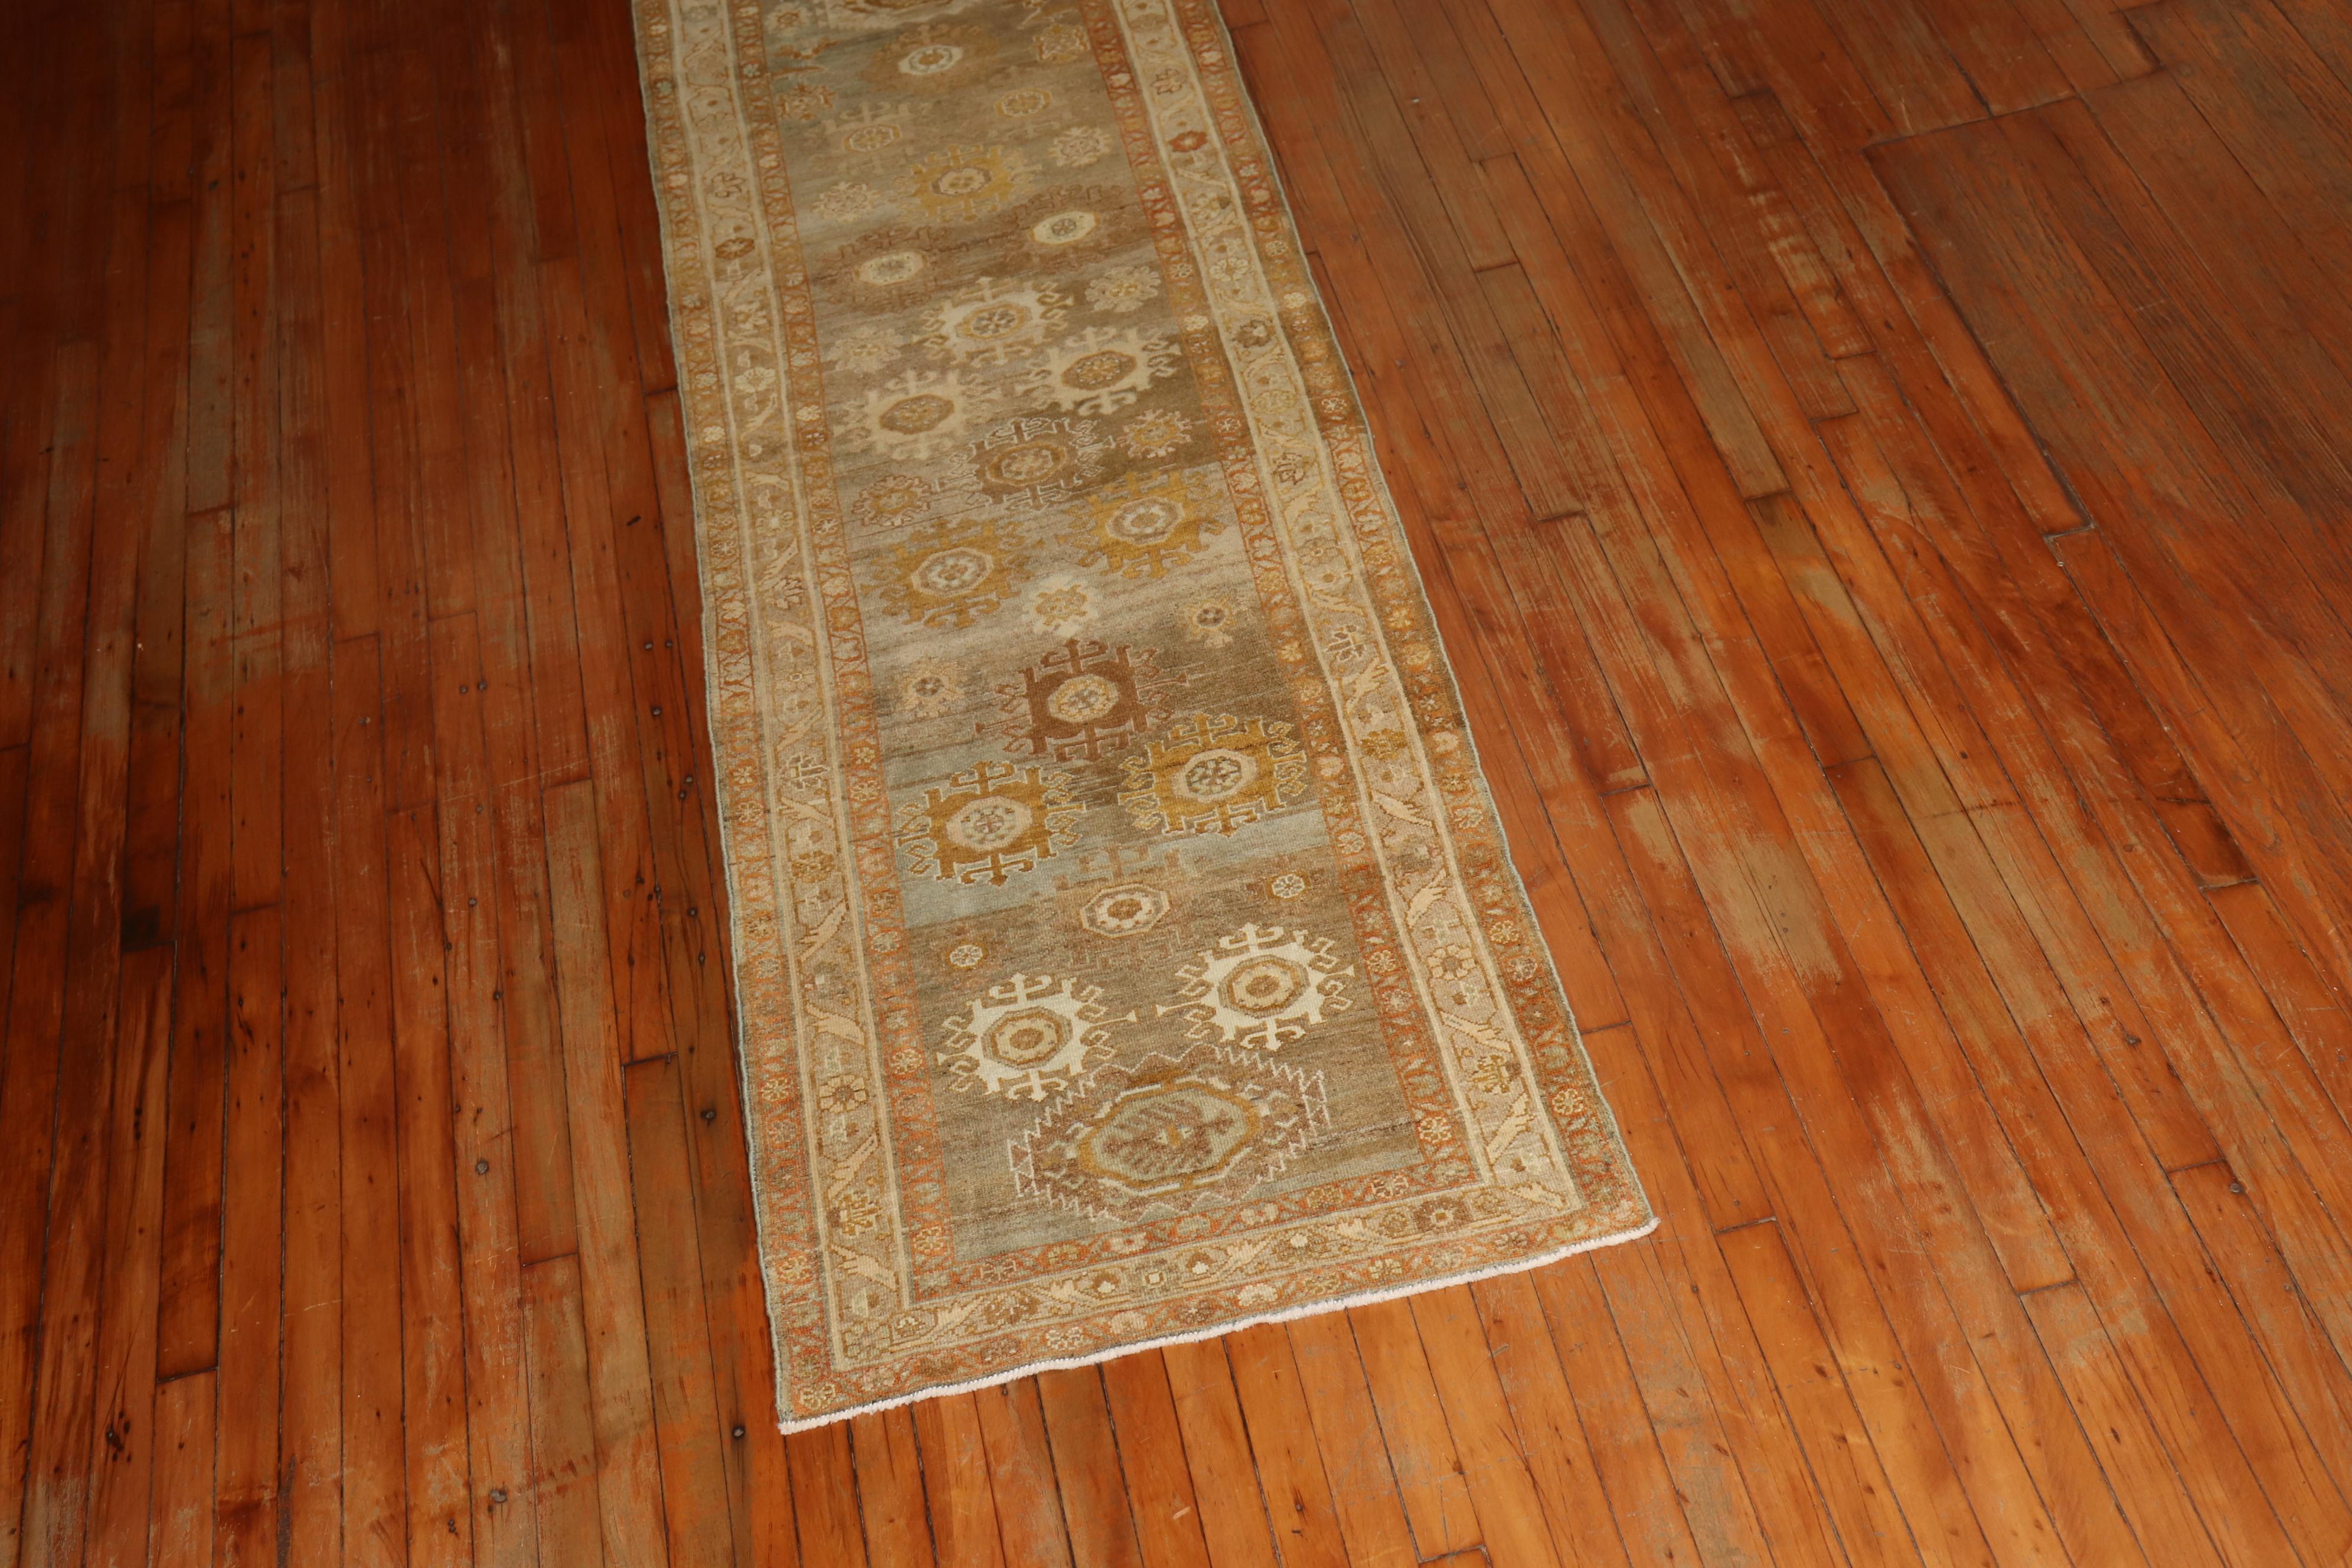 Stunning Persian Malayer runner in caramel tones with infamous mini khani design

Measures: 2'8'' x 16'.